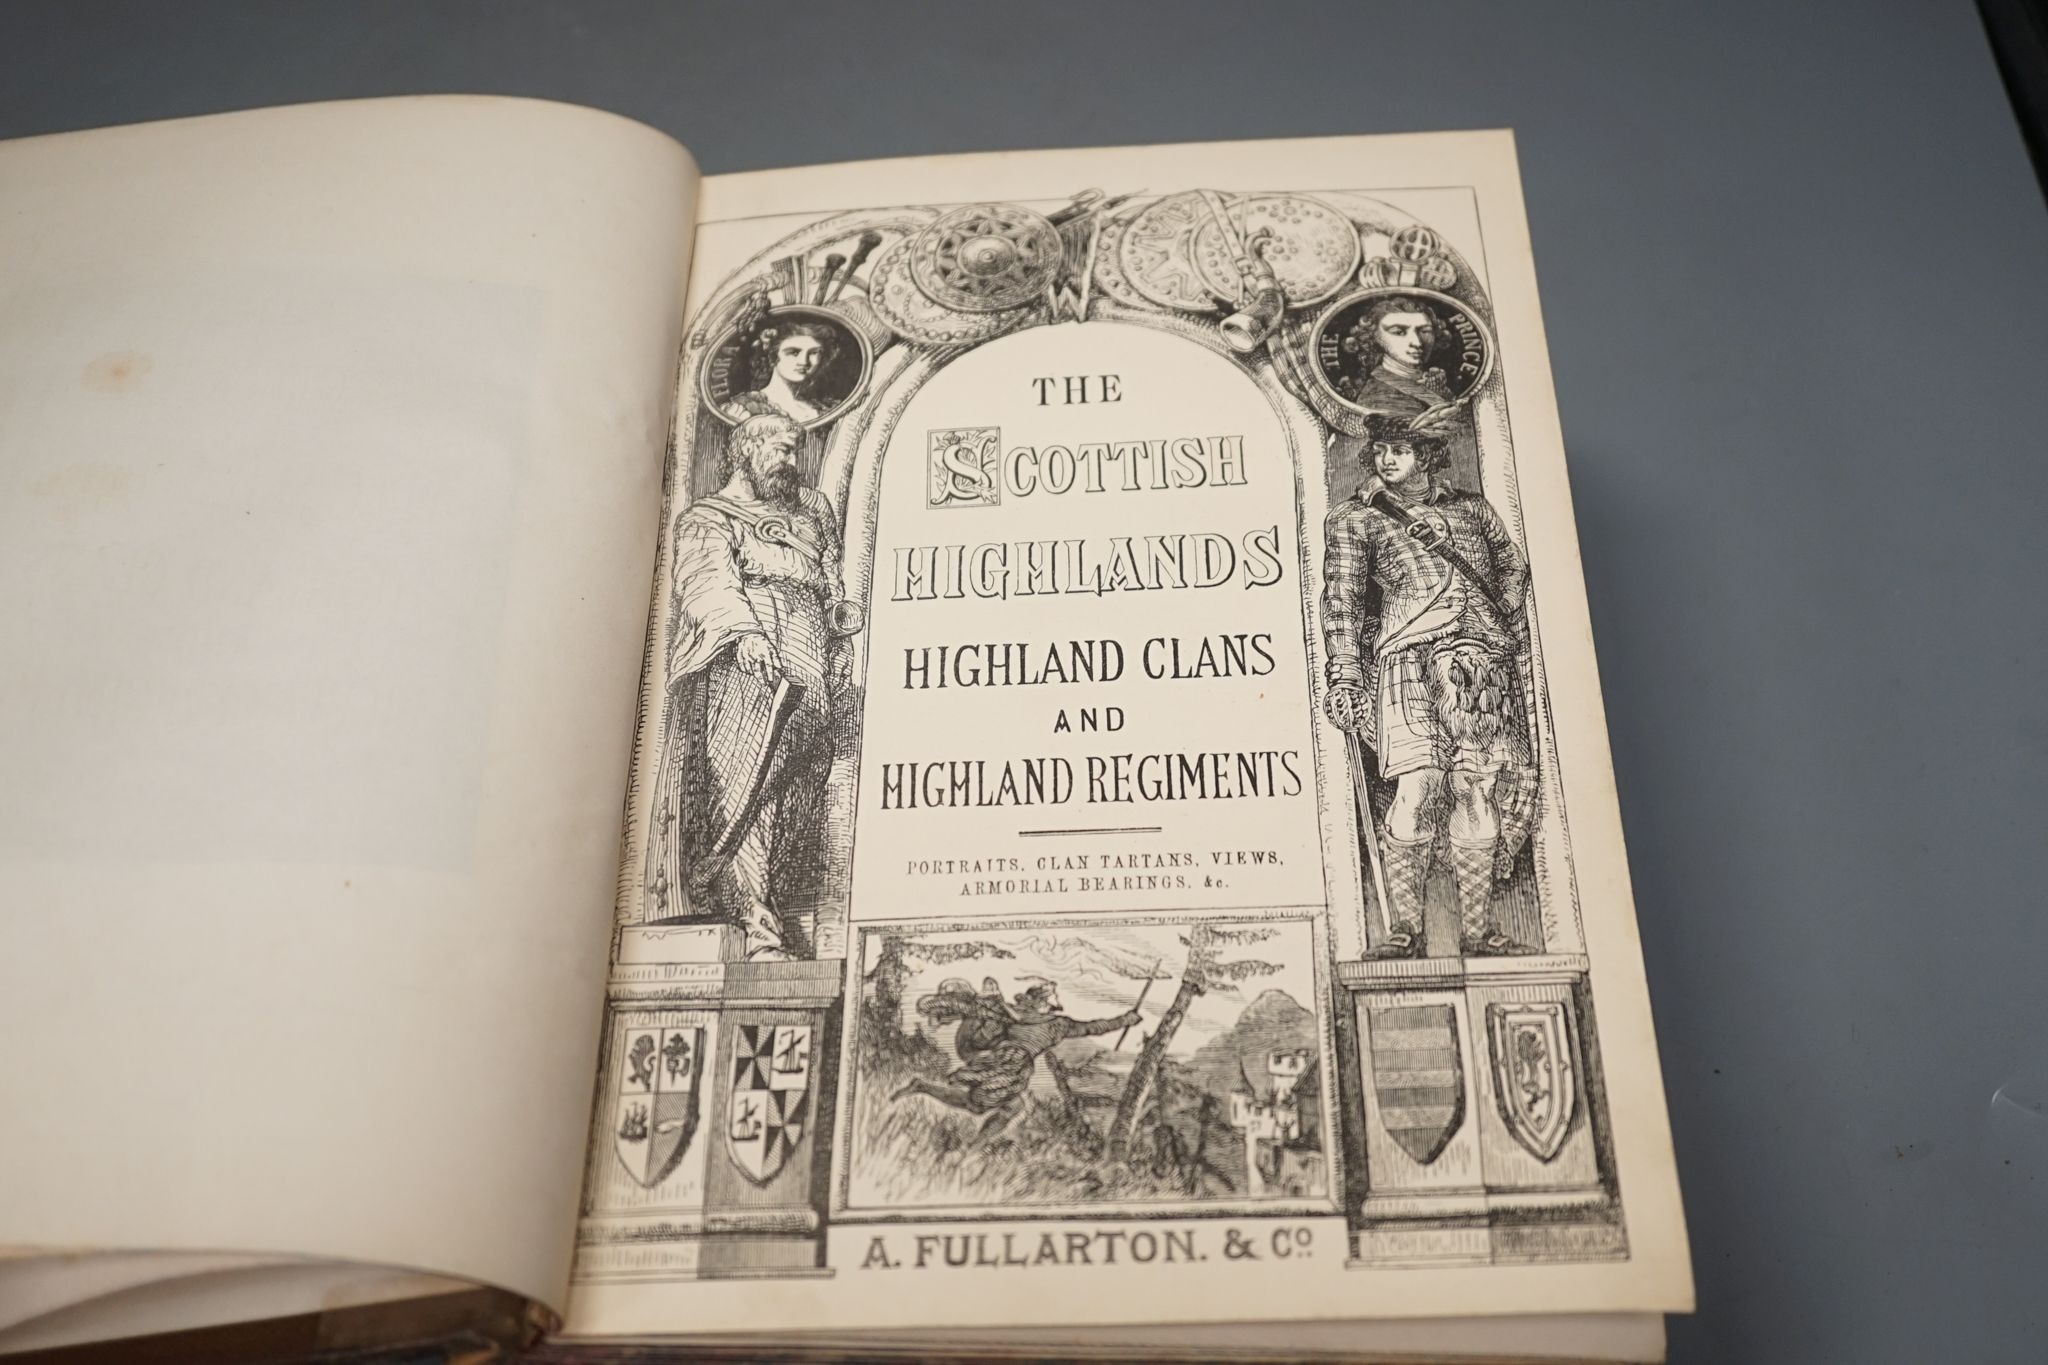 Keltie, John S. (editor) - A History of the Scottish Highlands, Highland Clans and Highland Regiments ... 2 vols, pictorial and printed titles, coloured and mounted cloth tartan plates